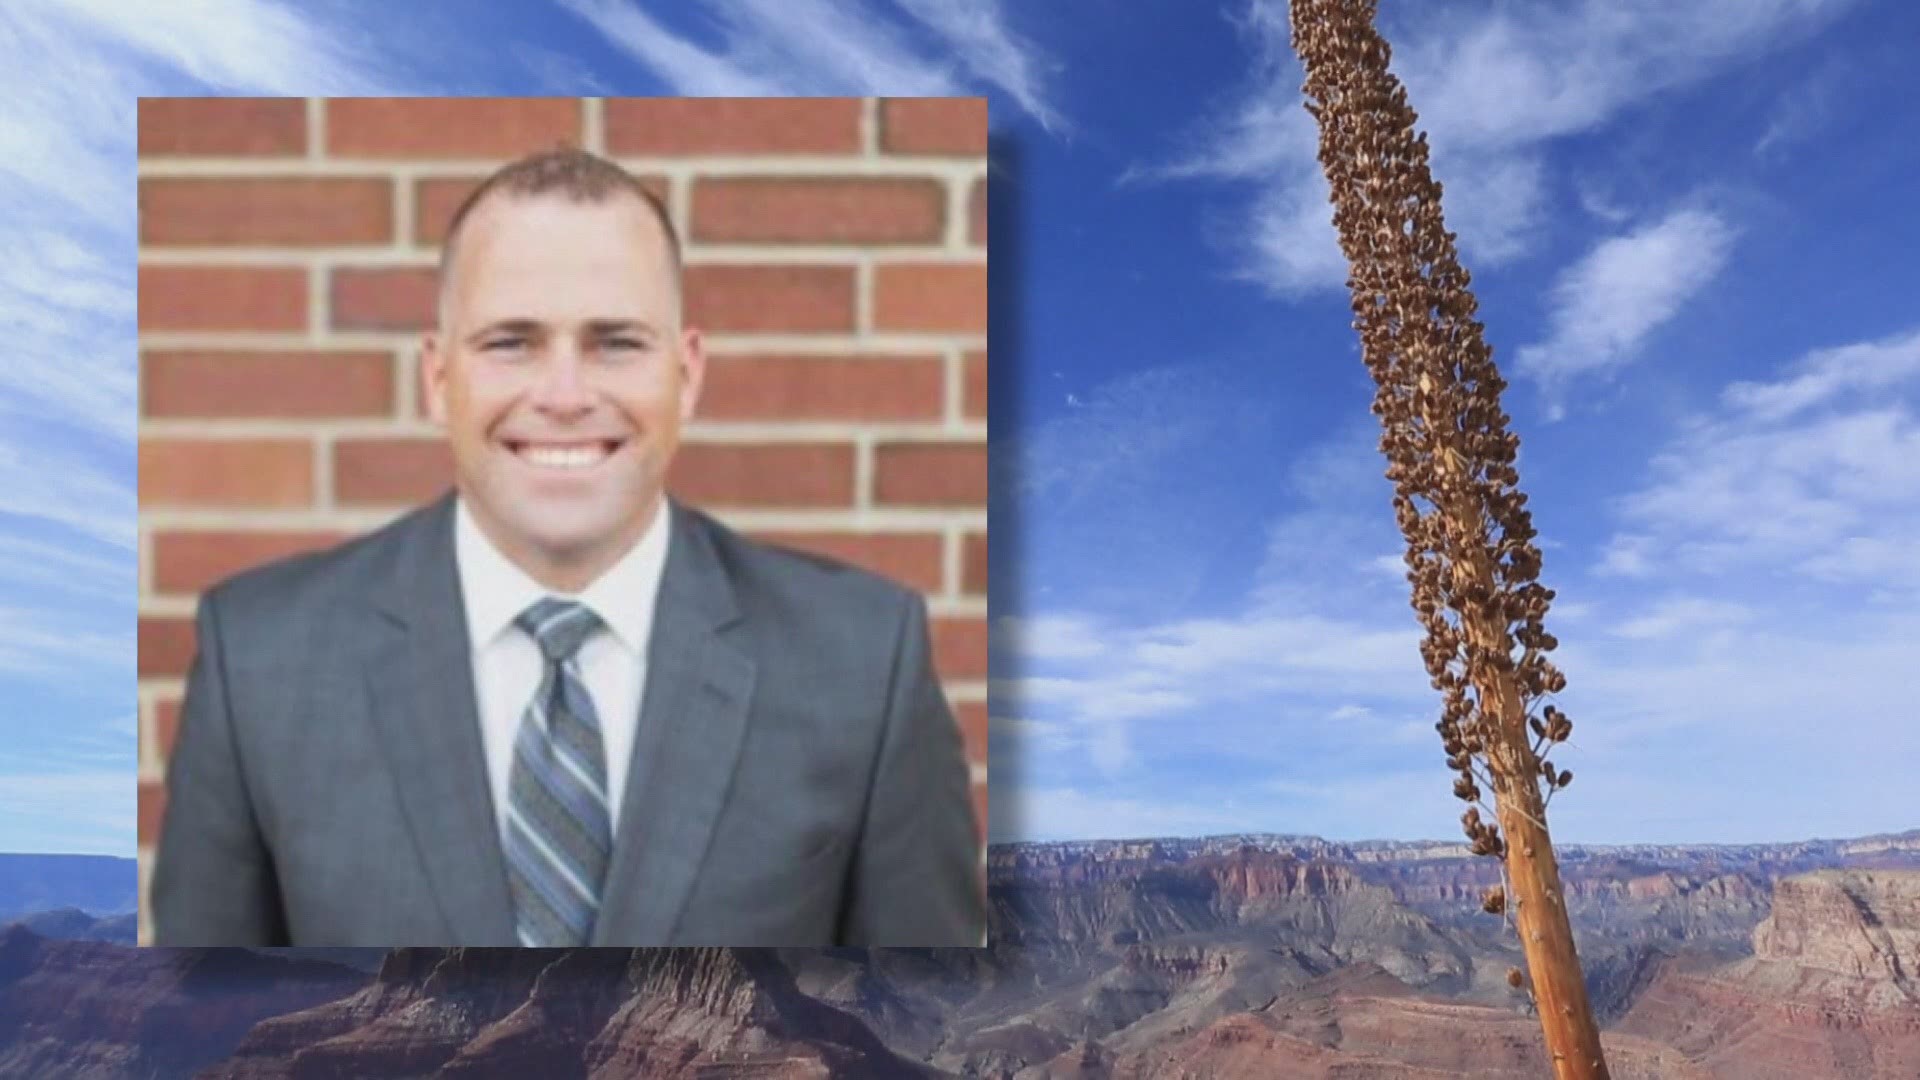 Joseph Mount is accused of leading more than 150 people on a trip to the Grand Canyon last year. He now faces federal charges.